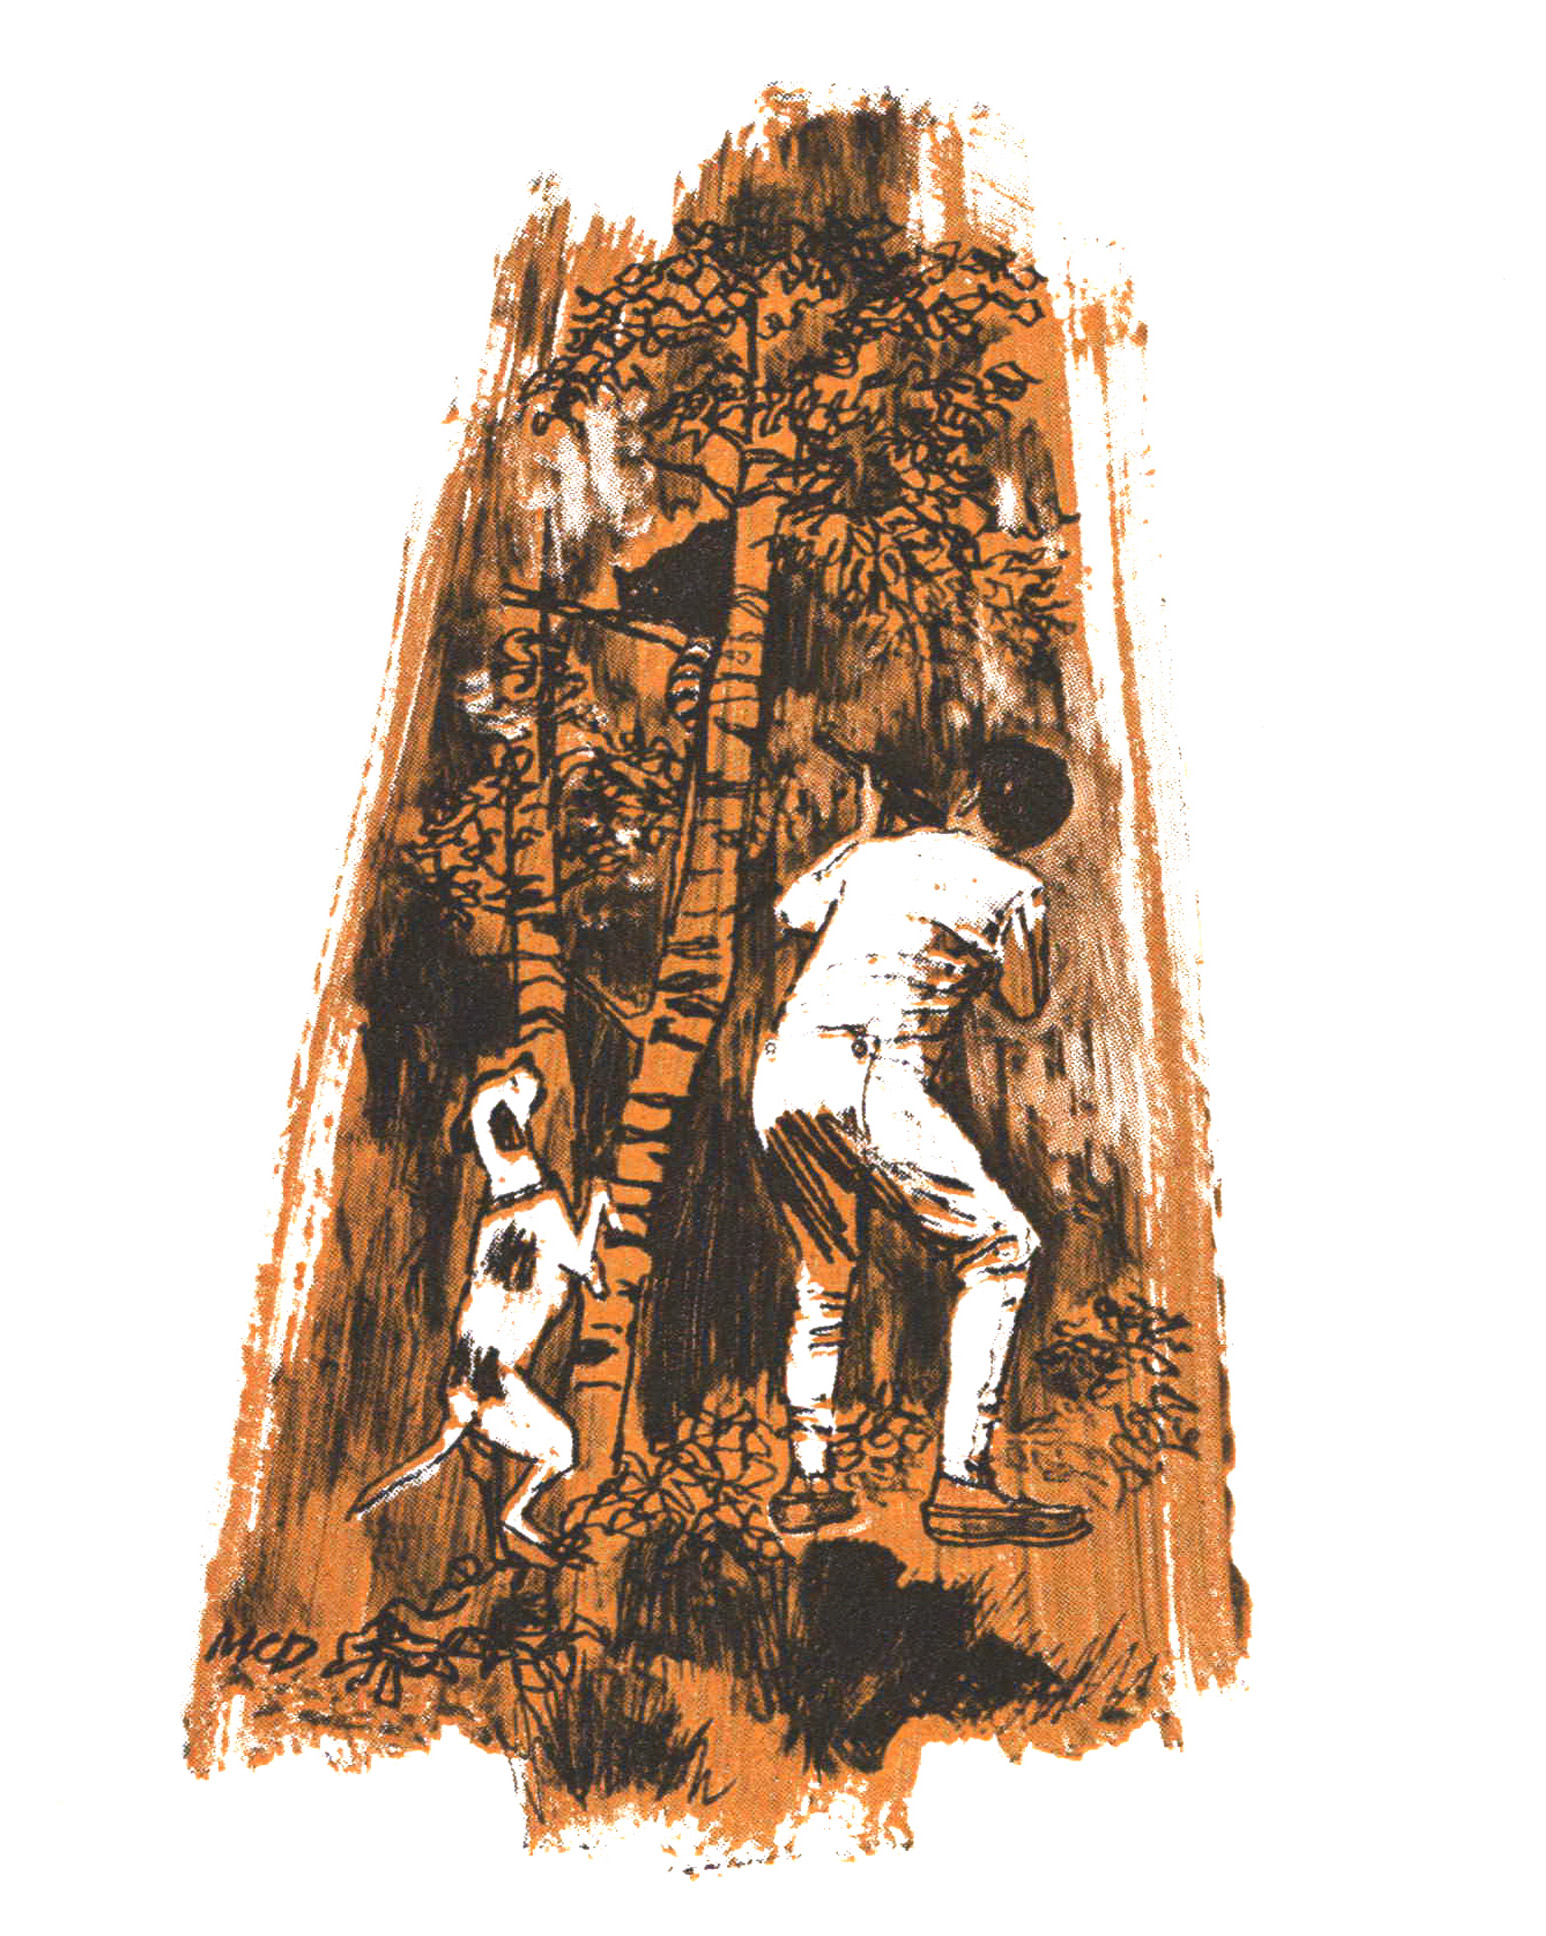 An illustration of a boy in white pajamas aiming at a raccoon in a tree.